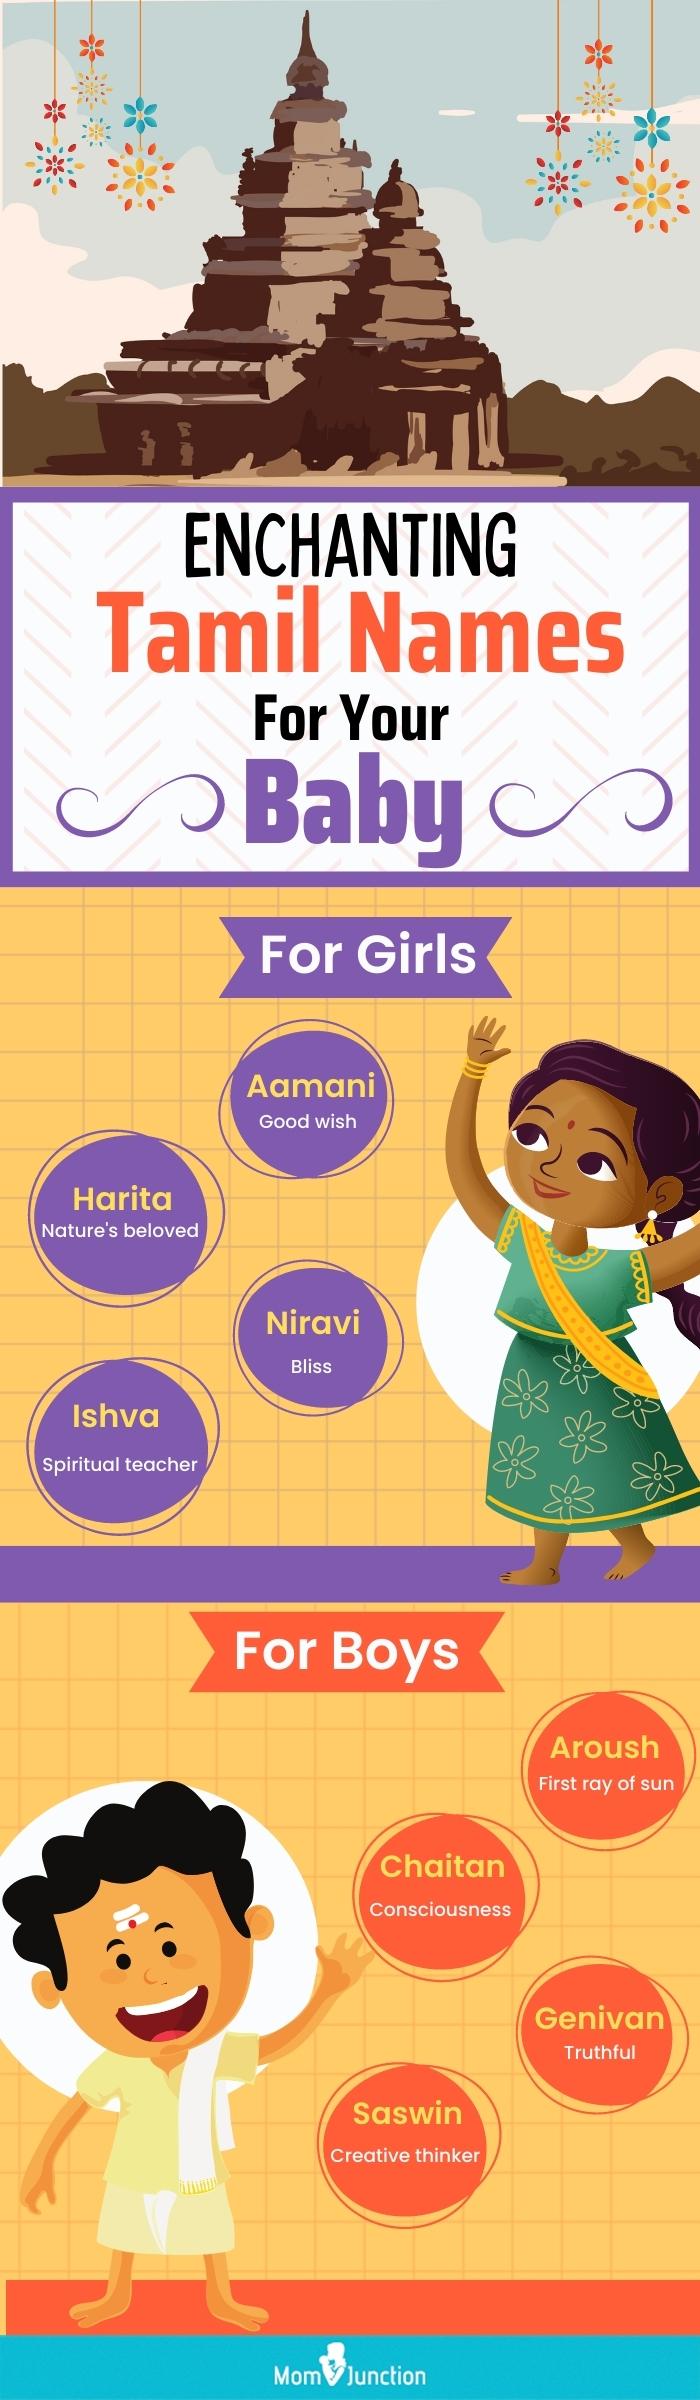 Enchanting Tamil Names For Your Baby 1 